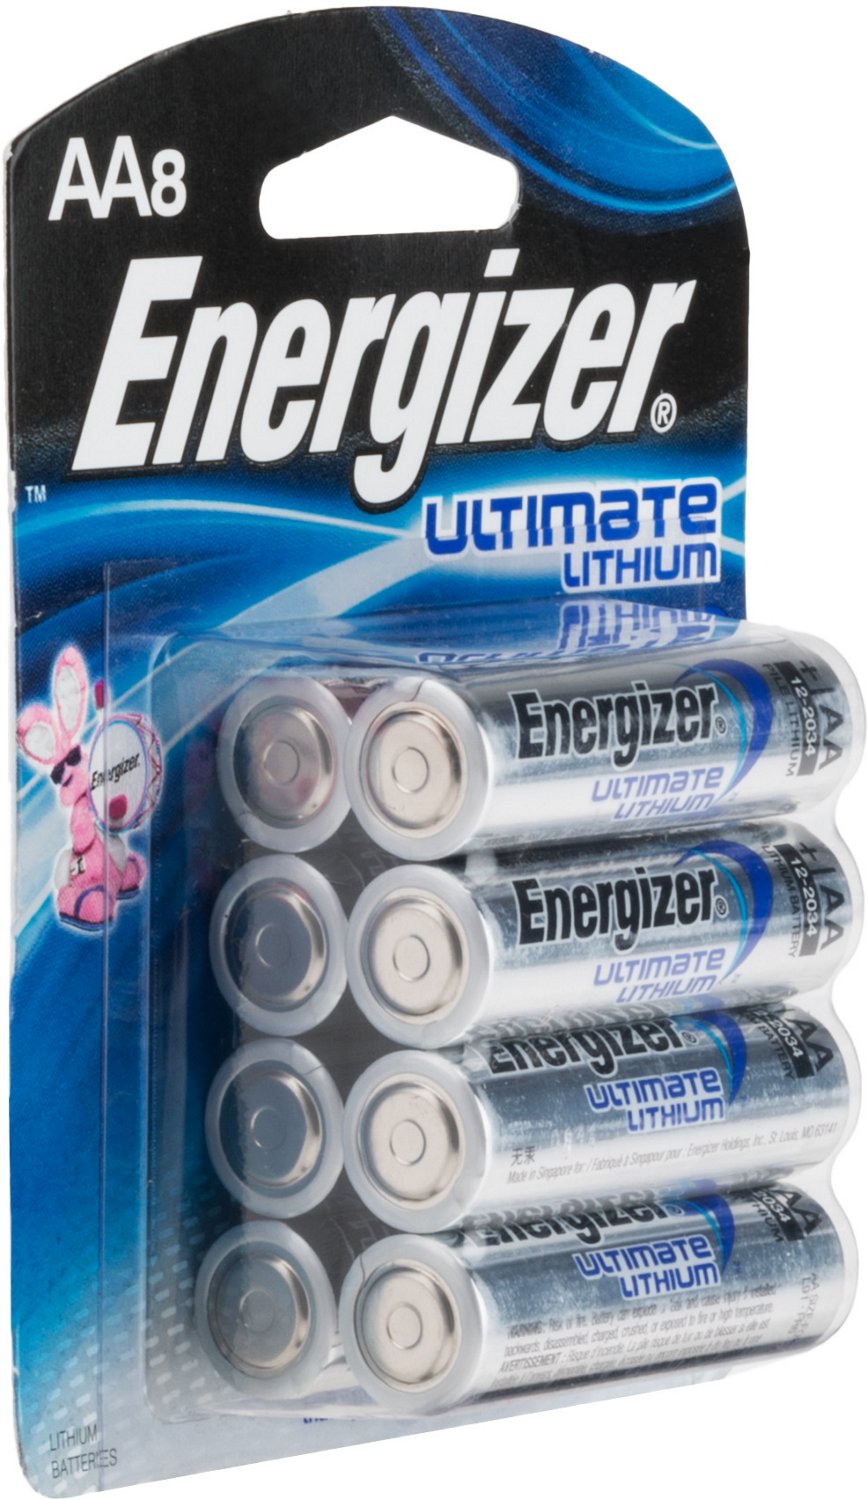 Energizer® Ultimate Lithium AA Batteries 8-Pack